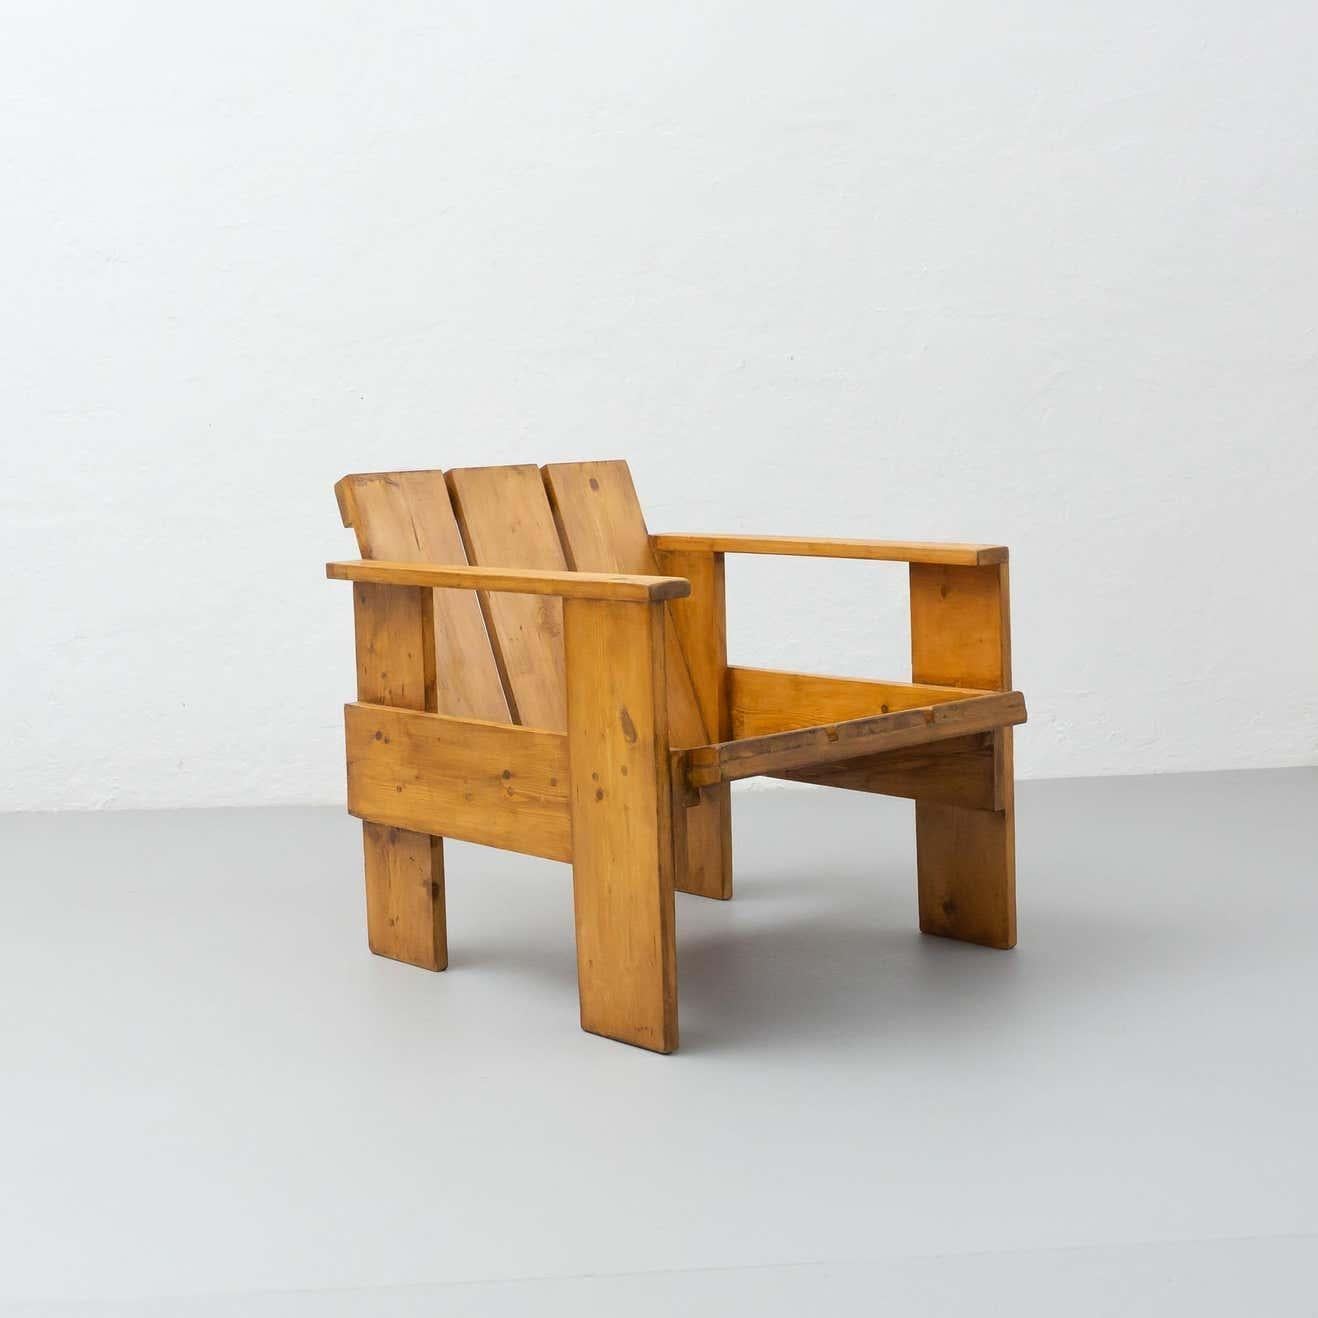 Gerrit Rietveld Mid-Century Modern Wood Crate Chair, circa 1950 For Sale 1